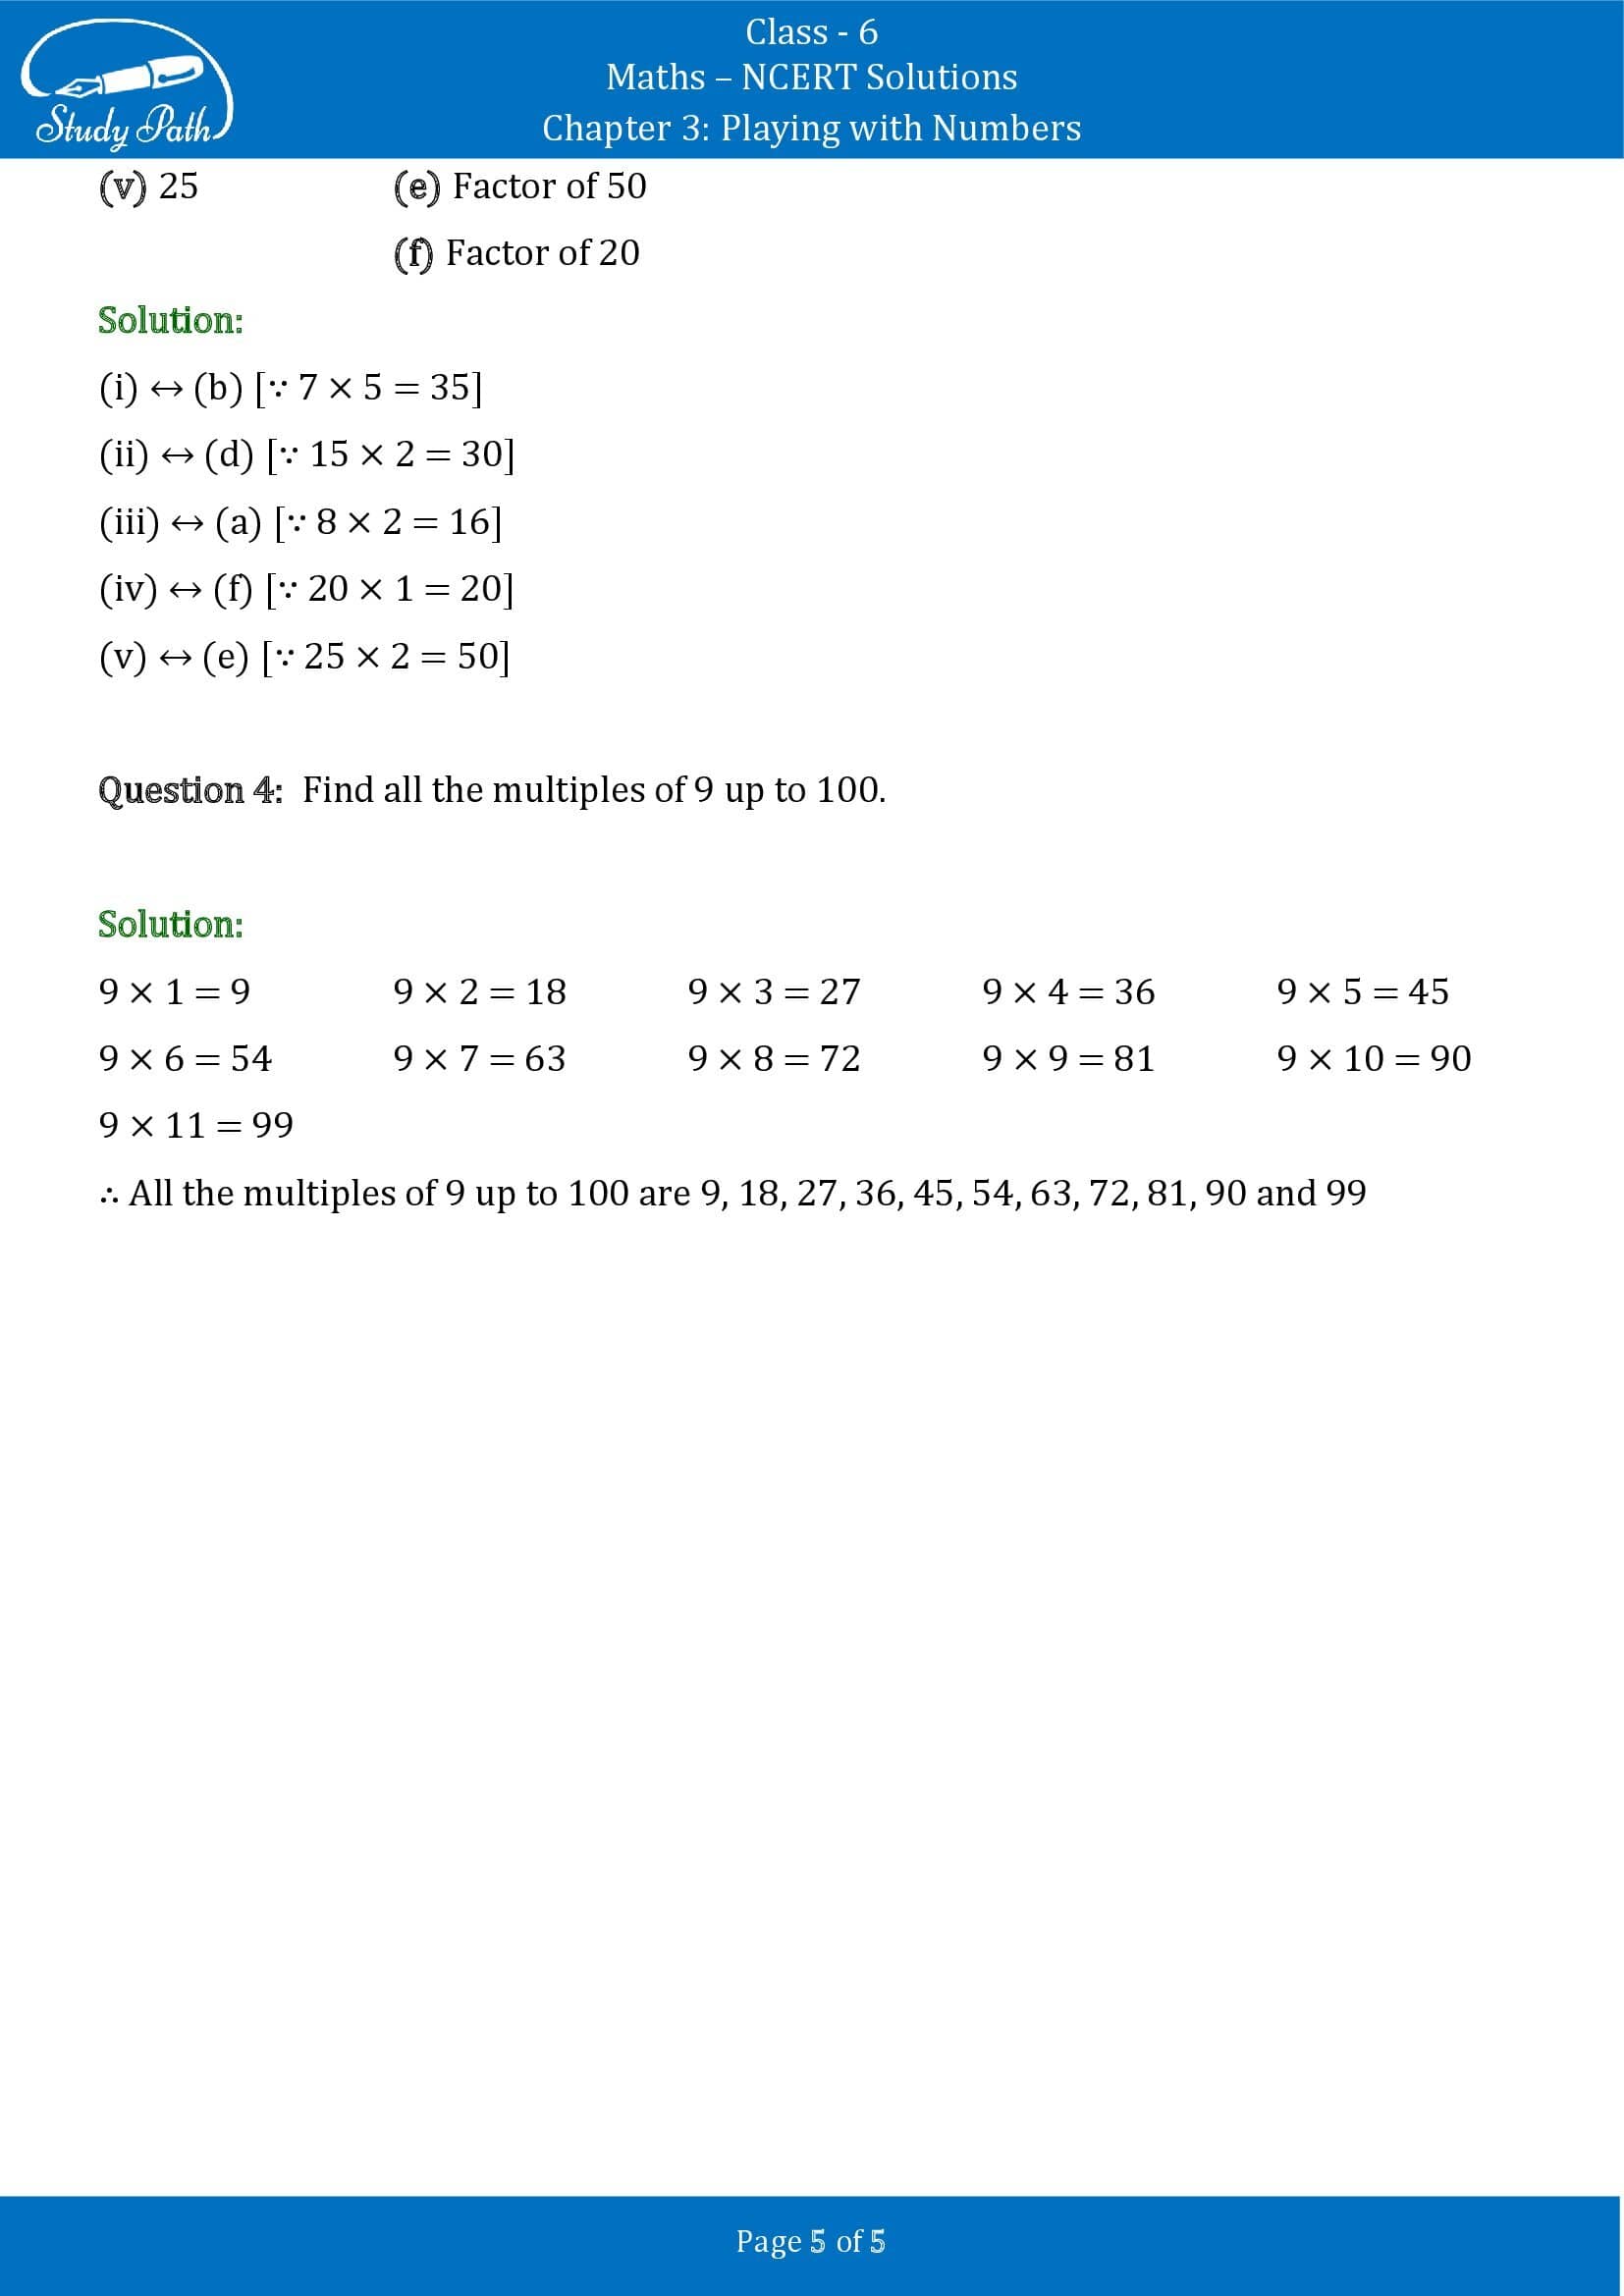 NCERT Solutions for Class 6 Maths Chapter 3 Playing with Numbers Exercise 3.1 00005